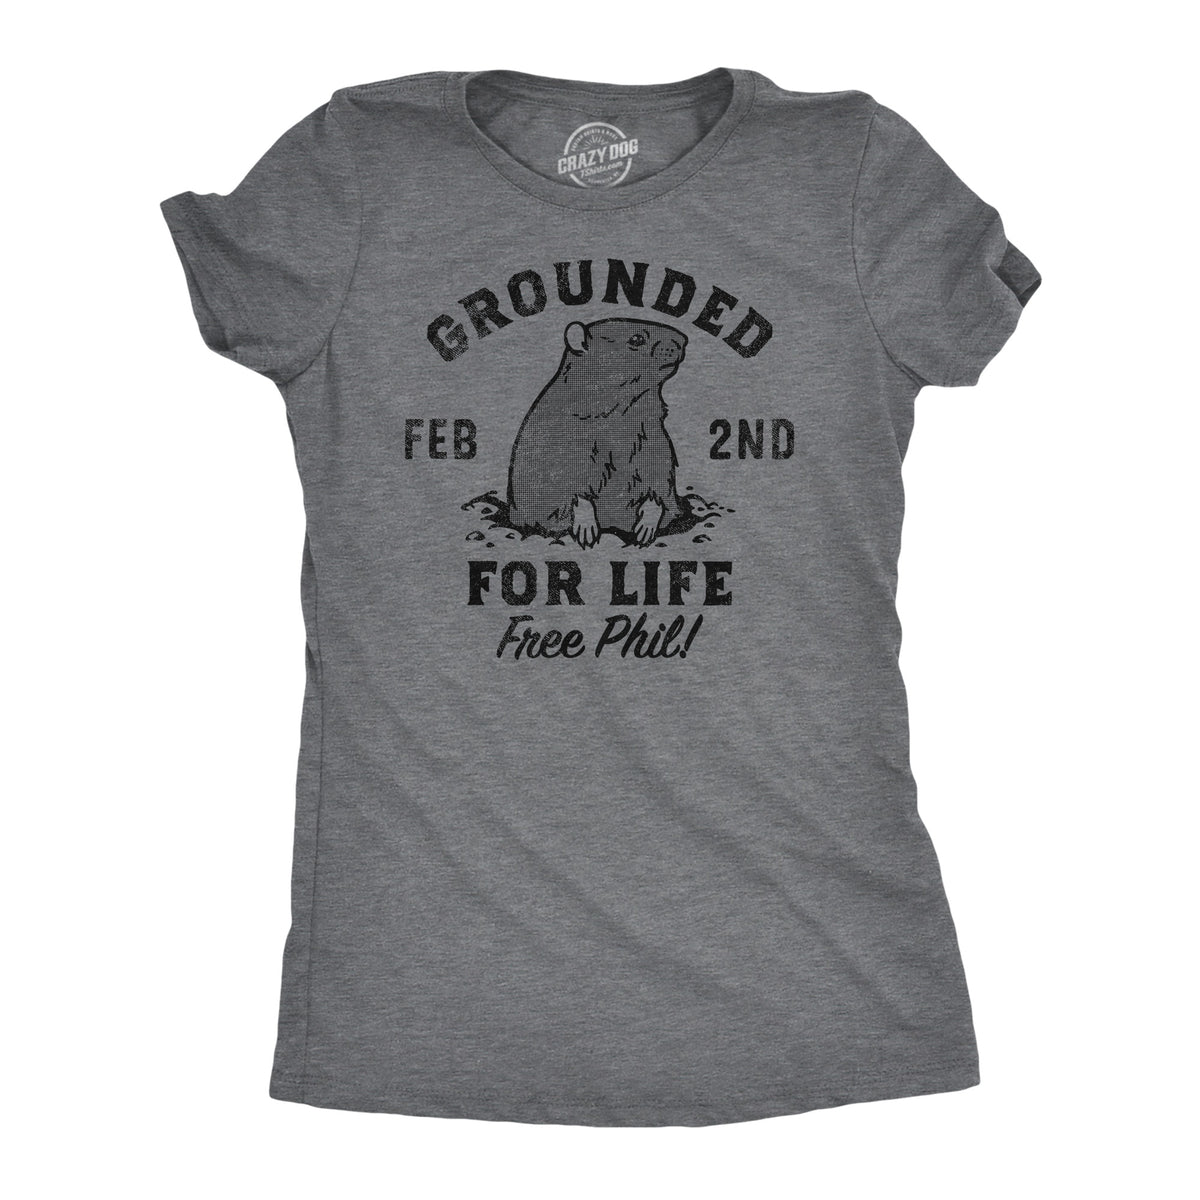 Funny Dark Heather Grey - Grounded For Life Grounded For Life Womens T Shirt Nerdy Sarcastic Tee